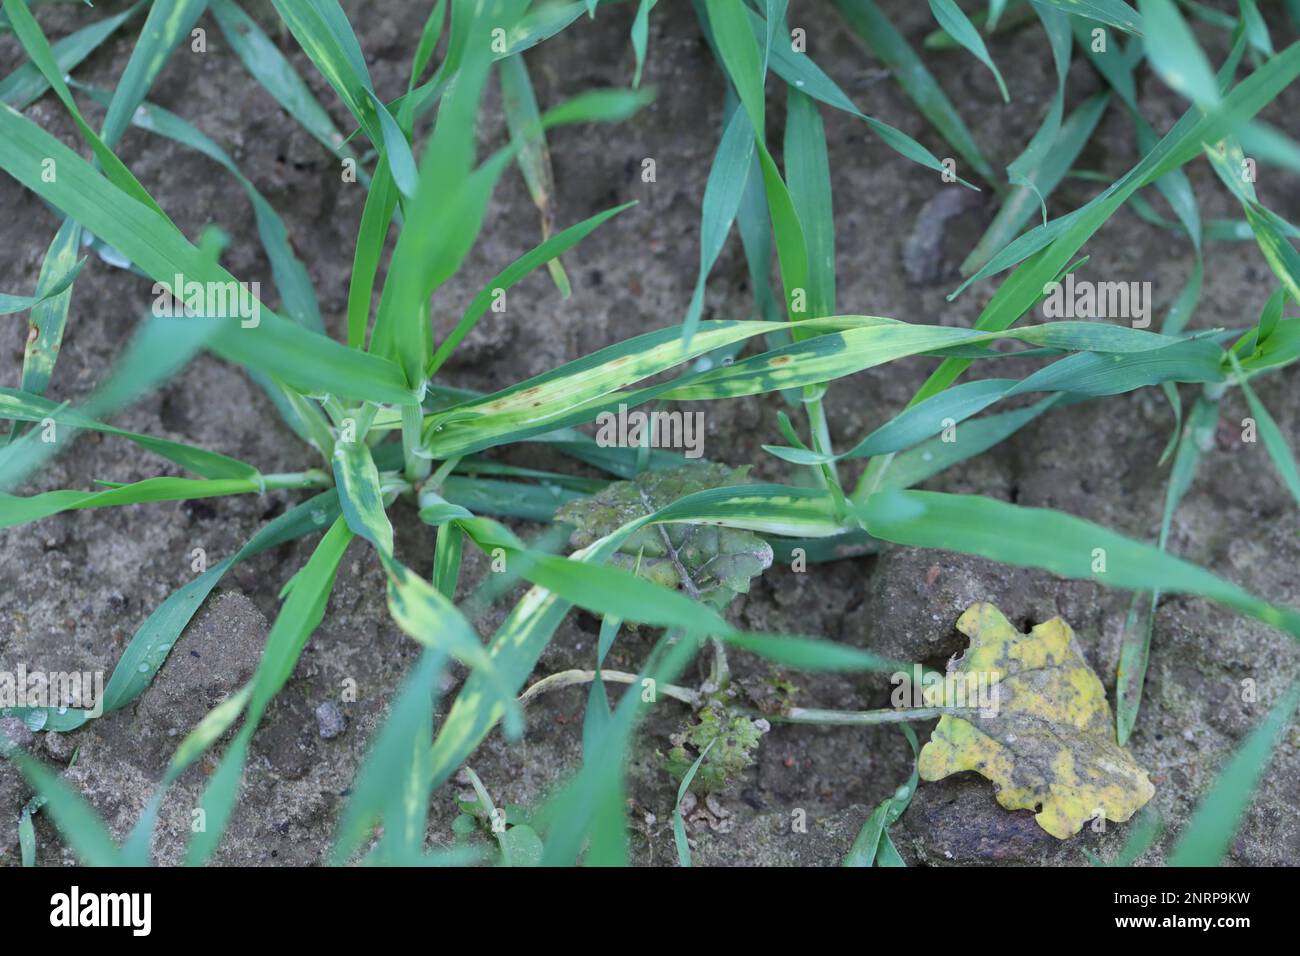 Young barley plants with symptoms of fungal disease, infection on leaves, chlorosis and dark spots. Stock Photo